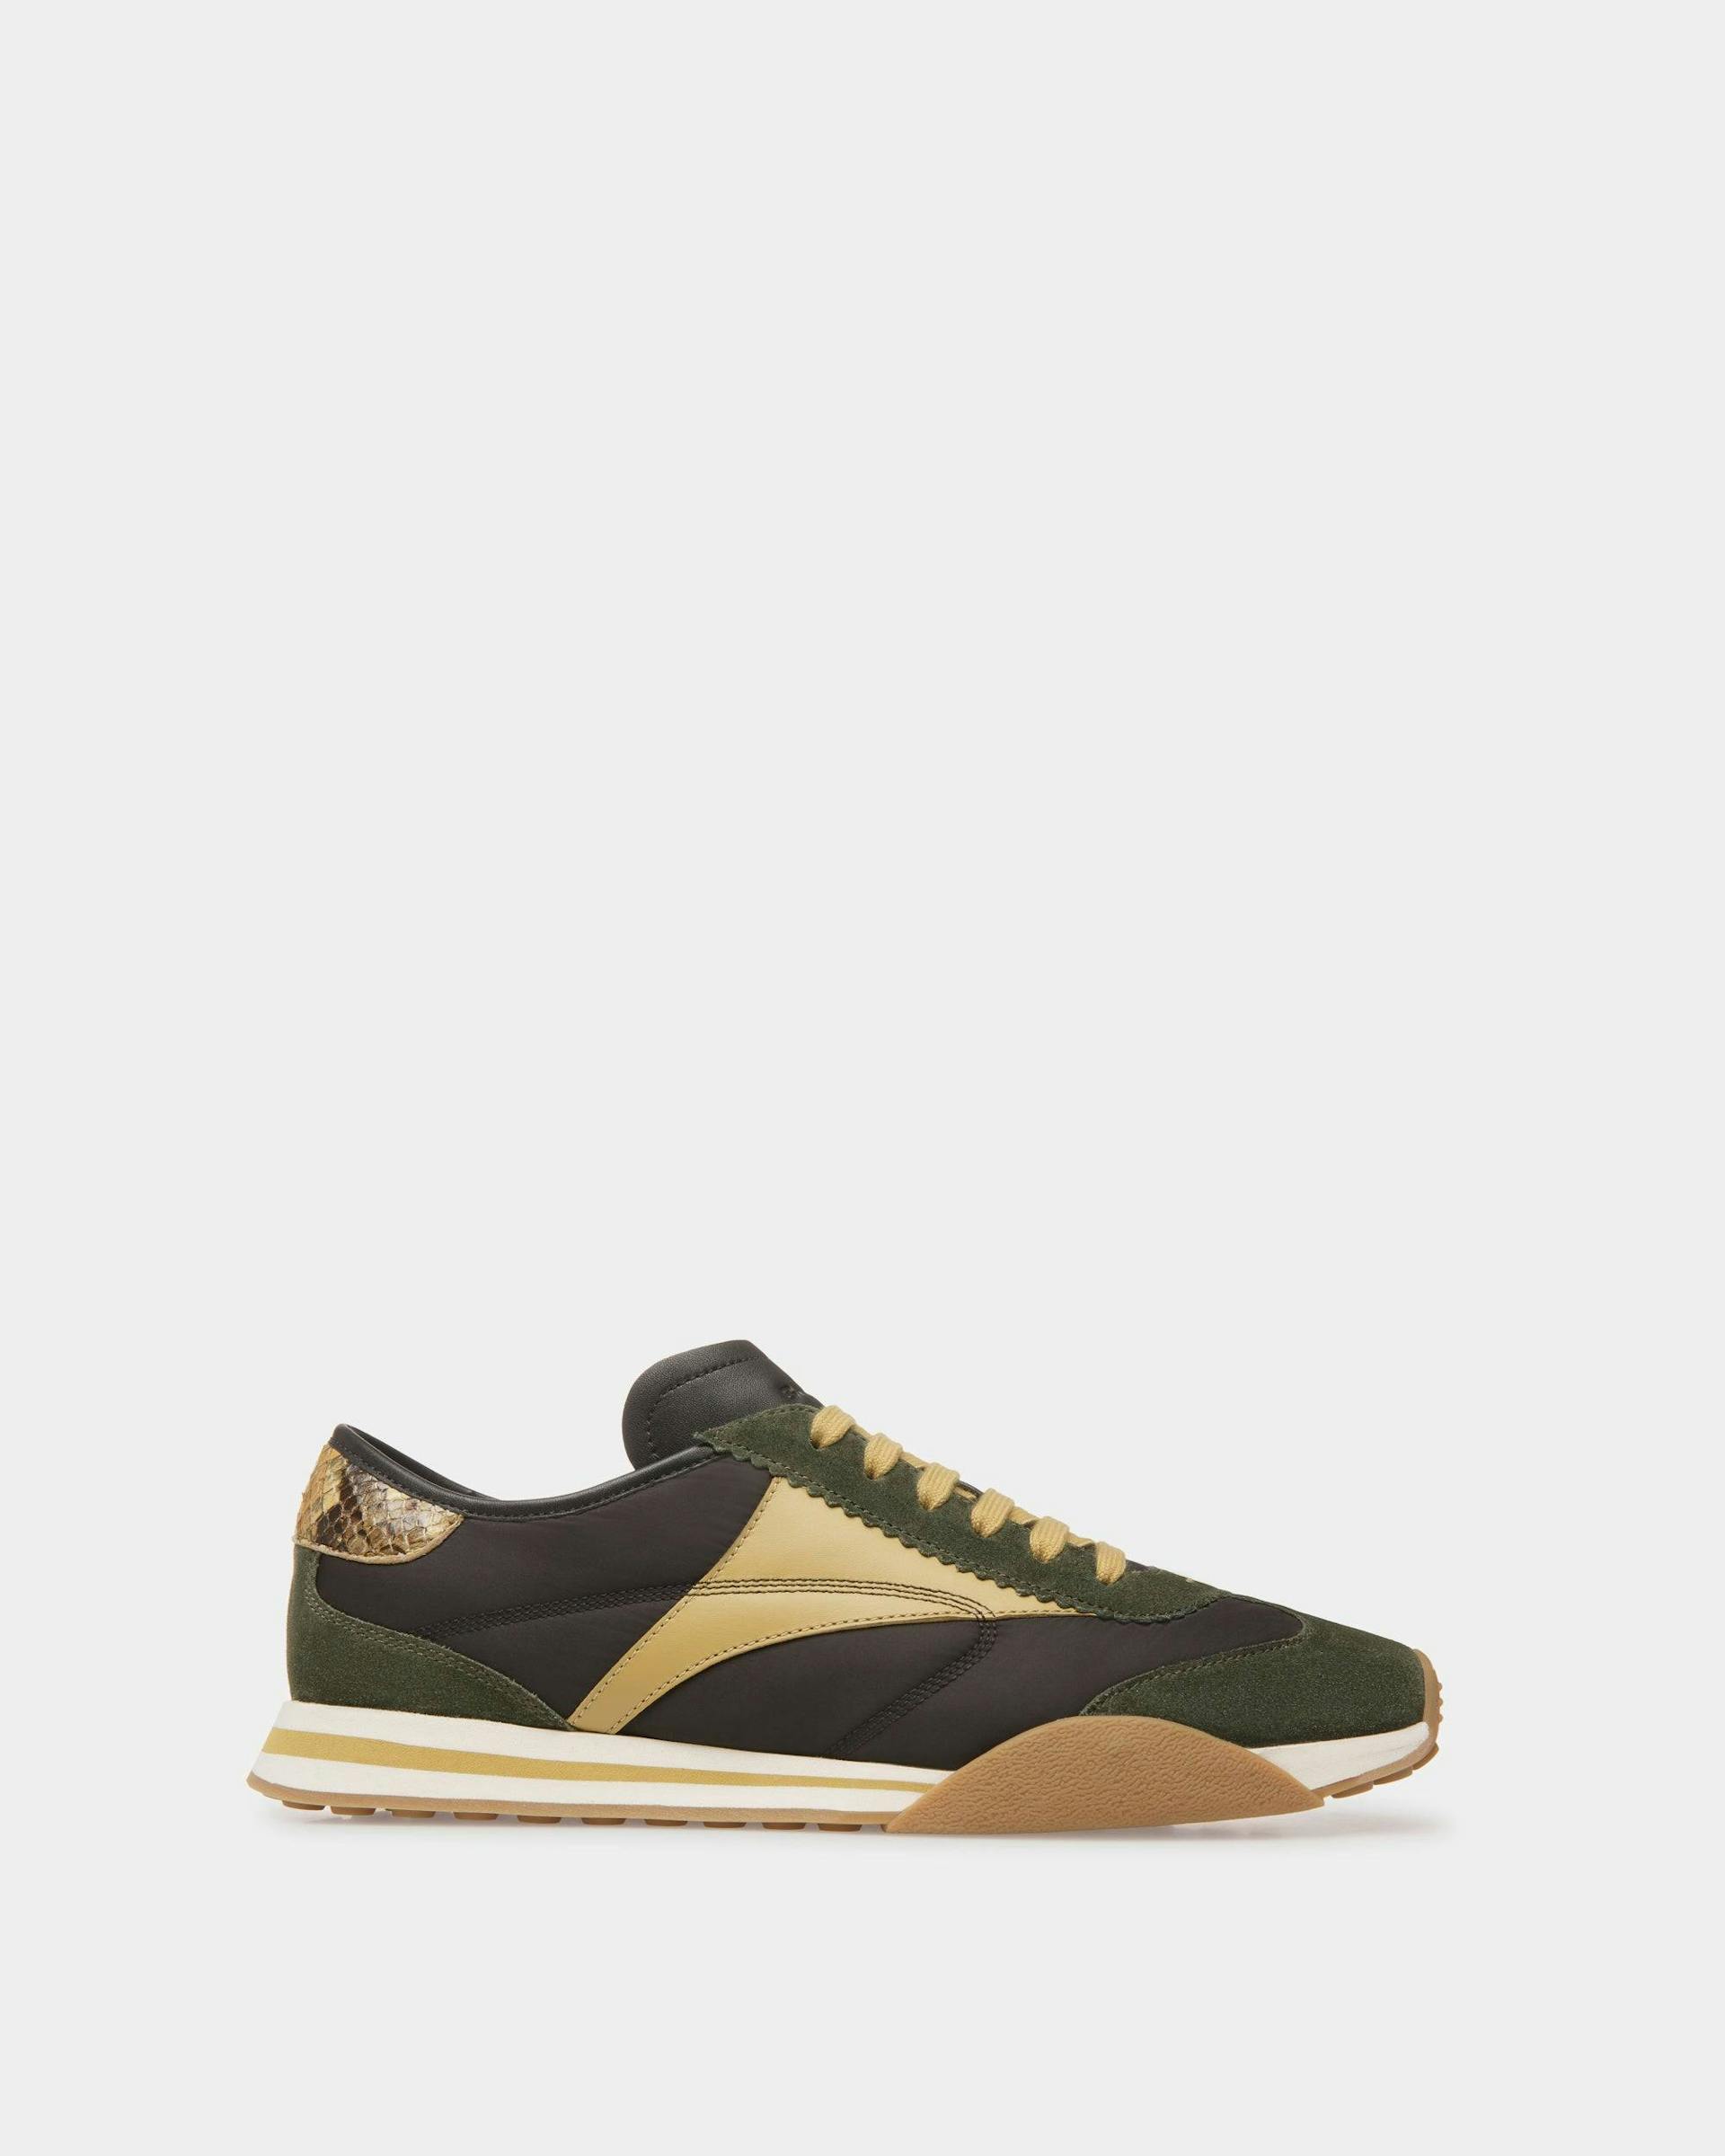 Sussex Sneakers In Green And Black Leather And Fabric - Men's - Bally - 01